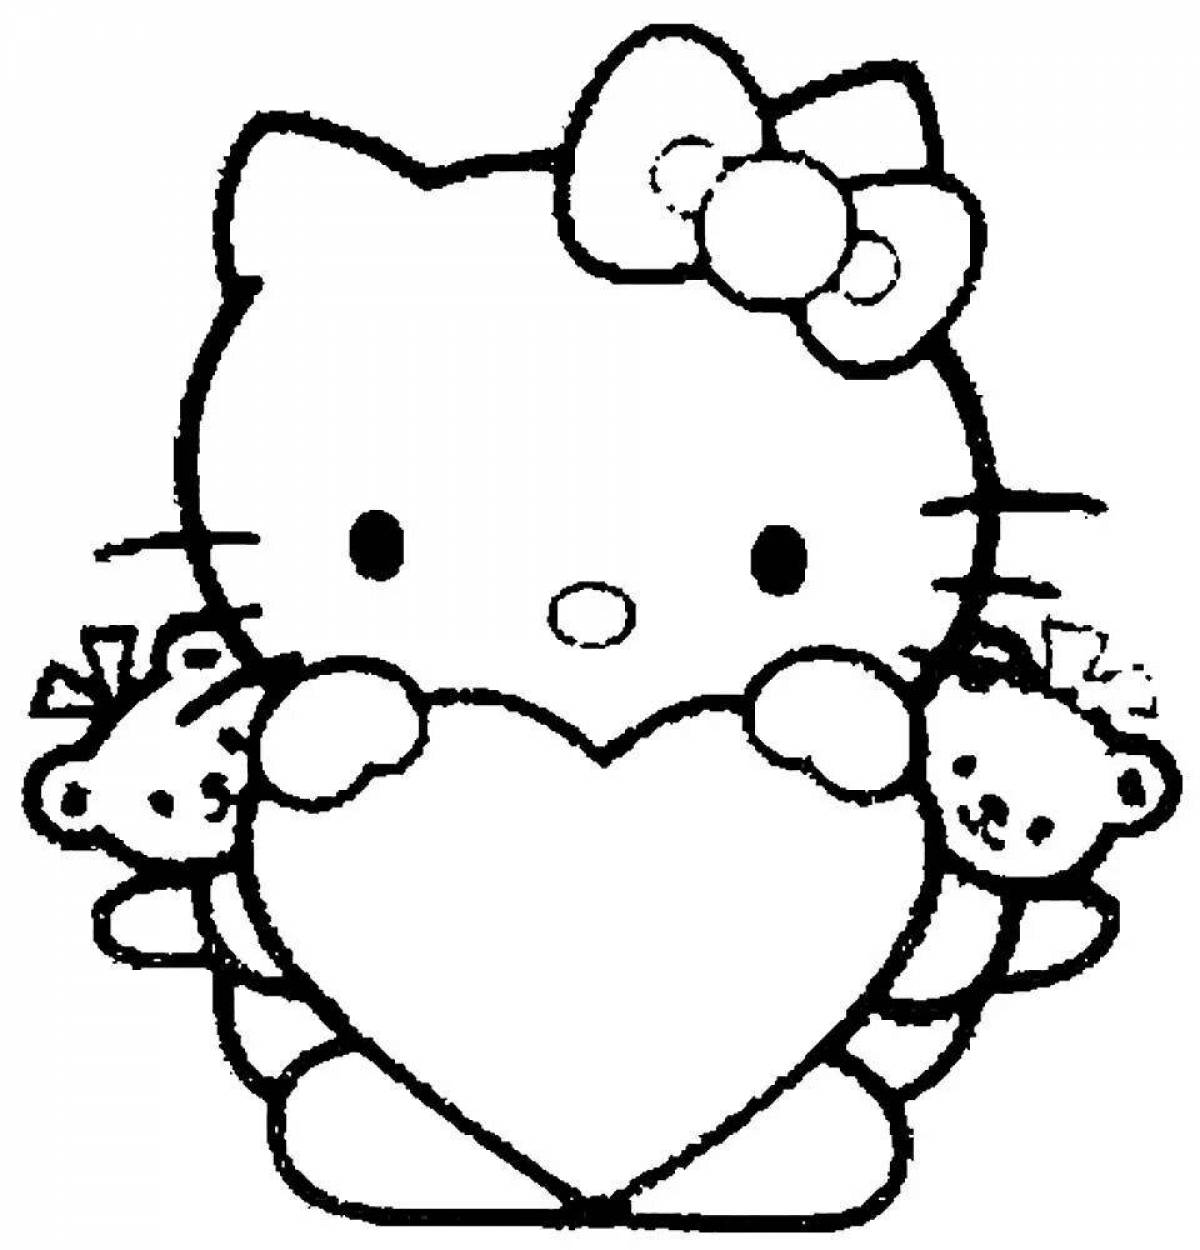 Coloring page grinning cat with a heart